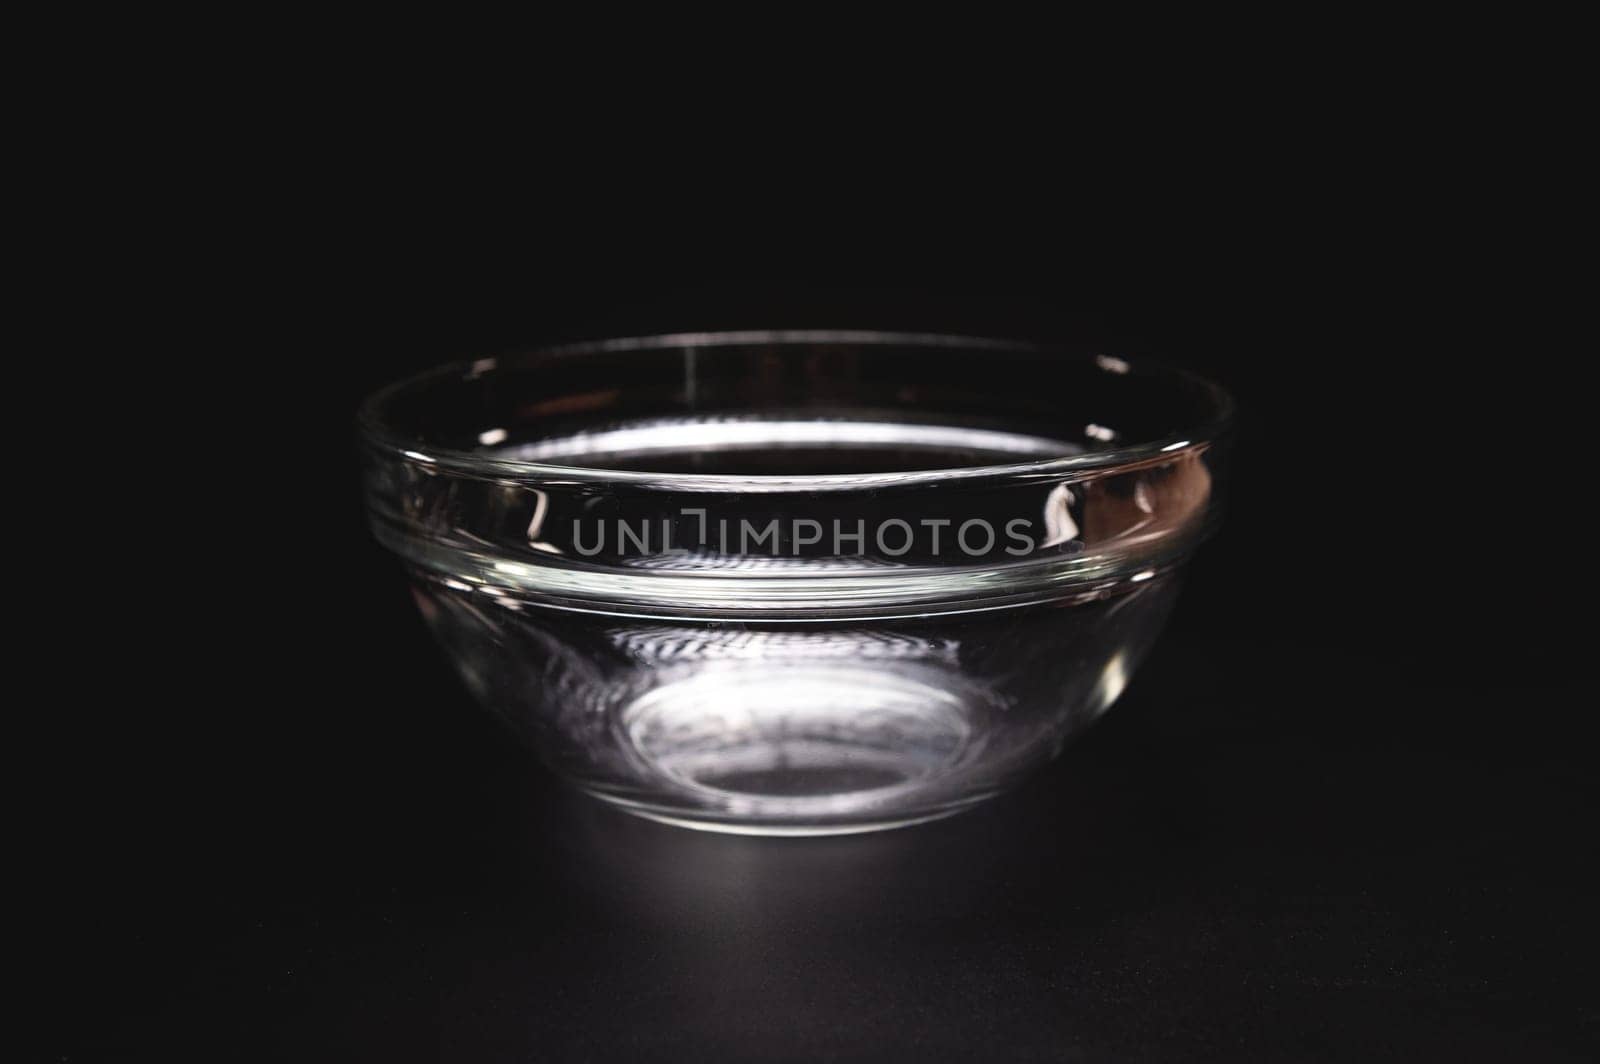 Empty glass plate or salad bowl for one person, on a black background, close-up.